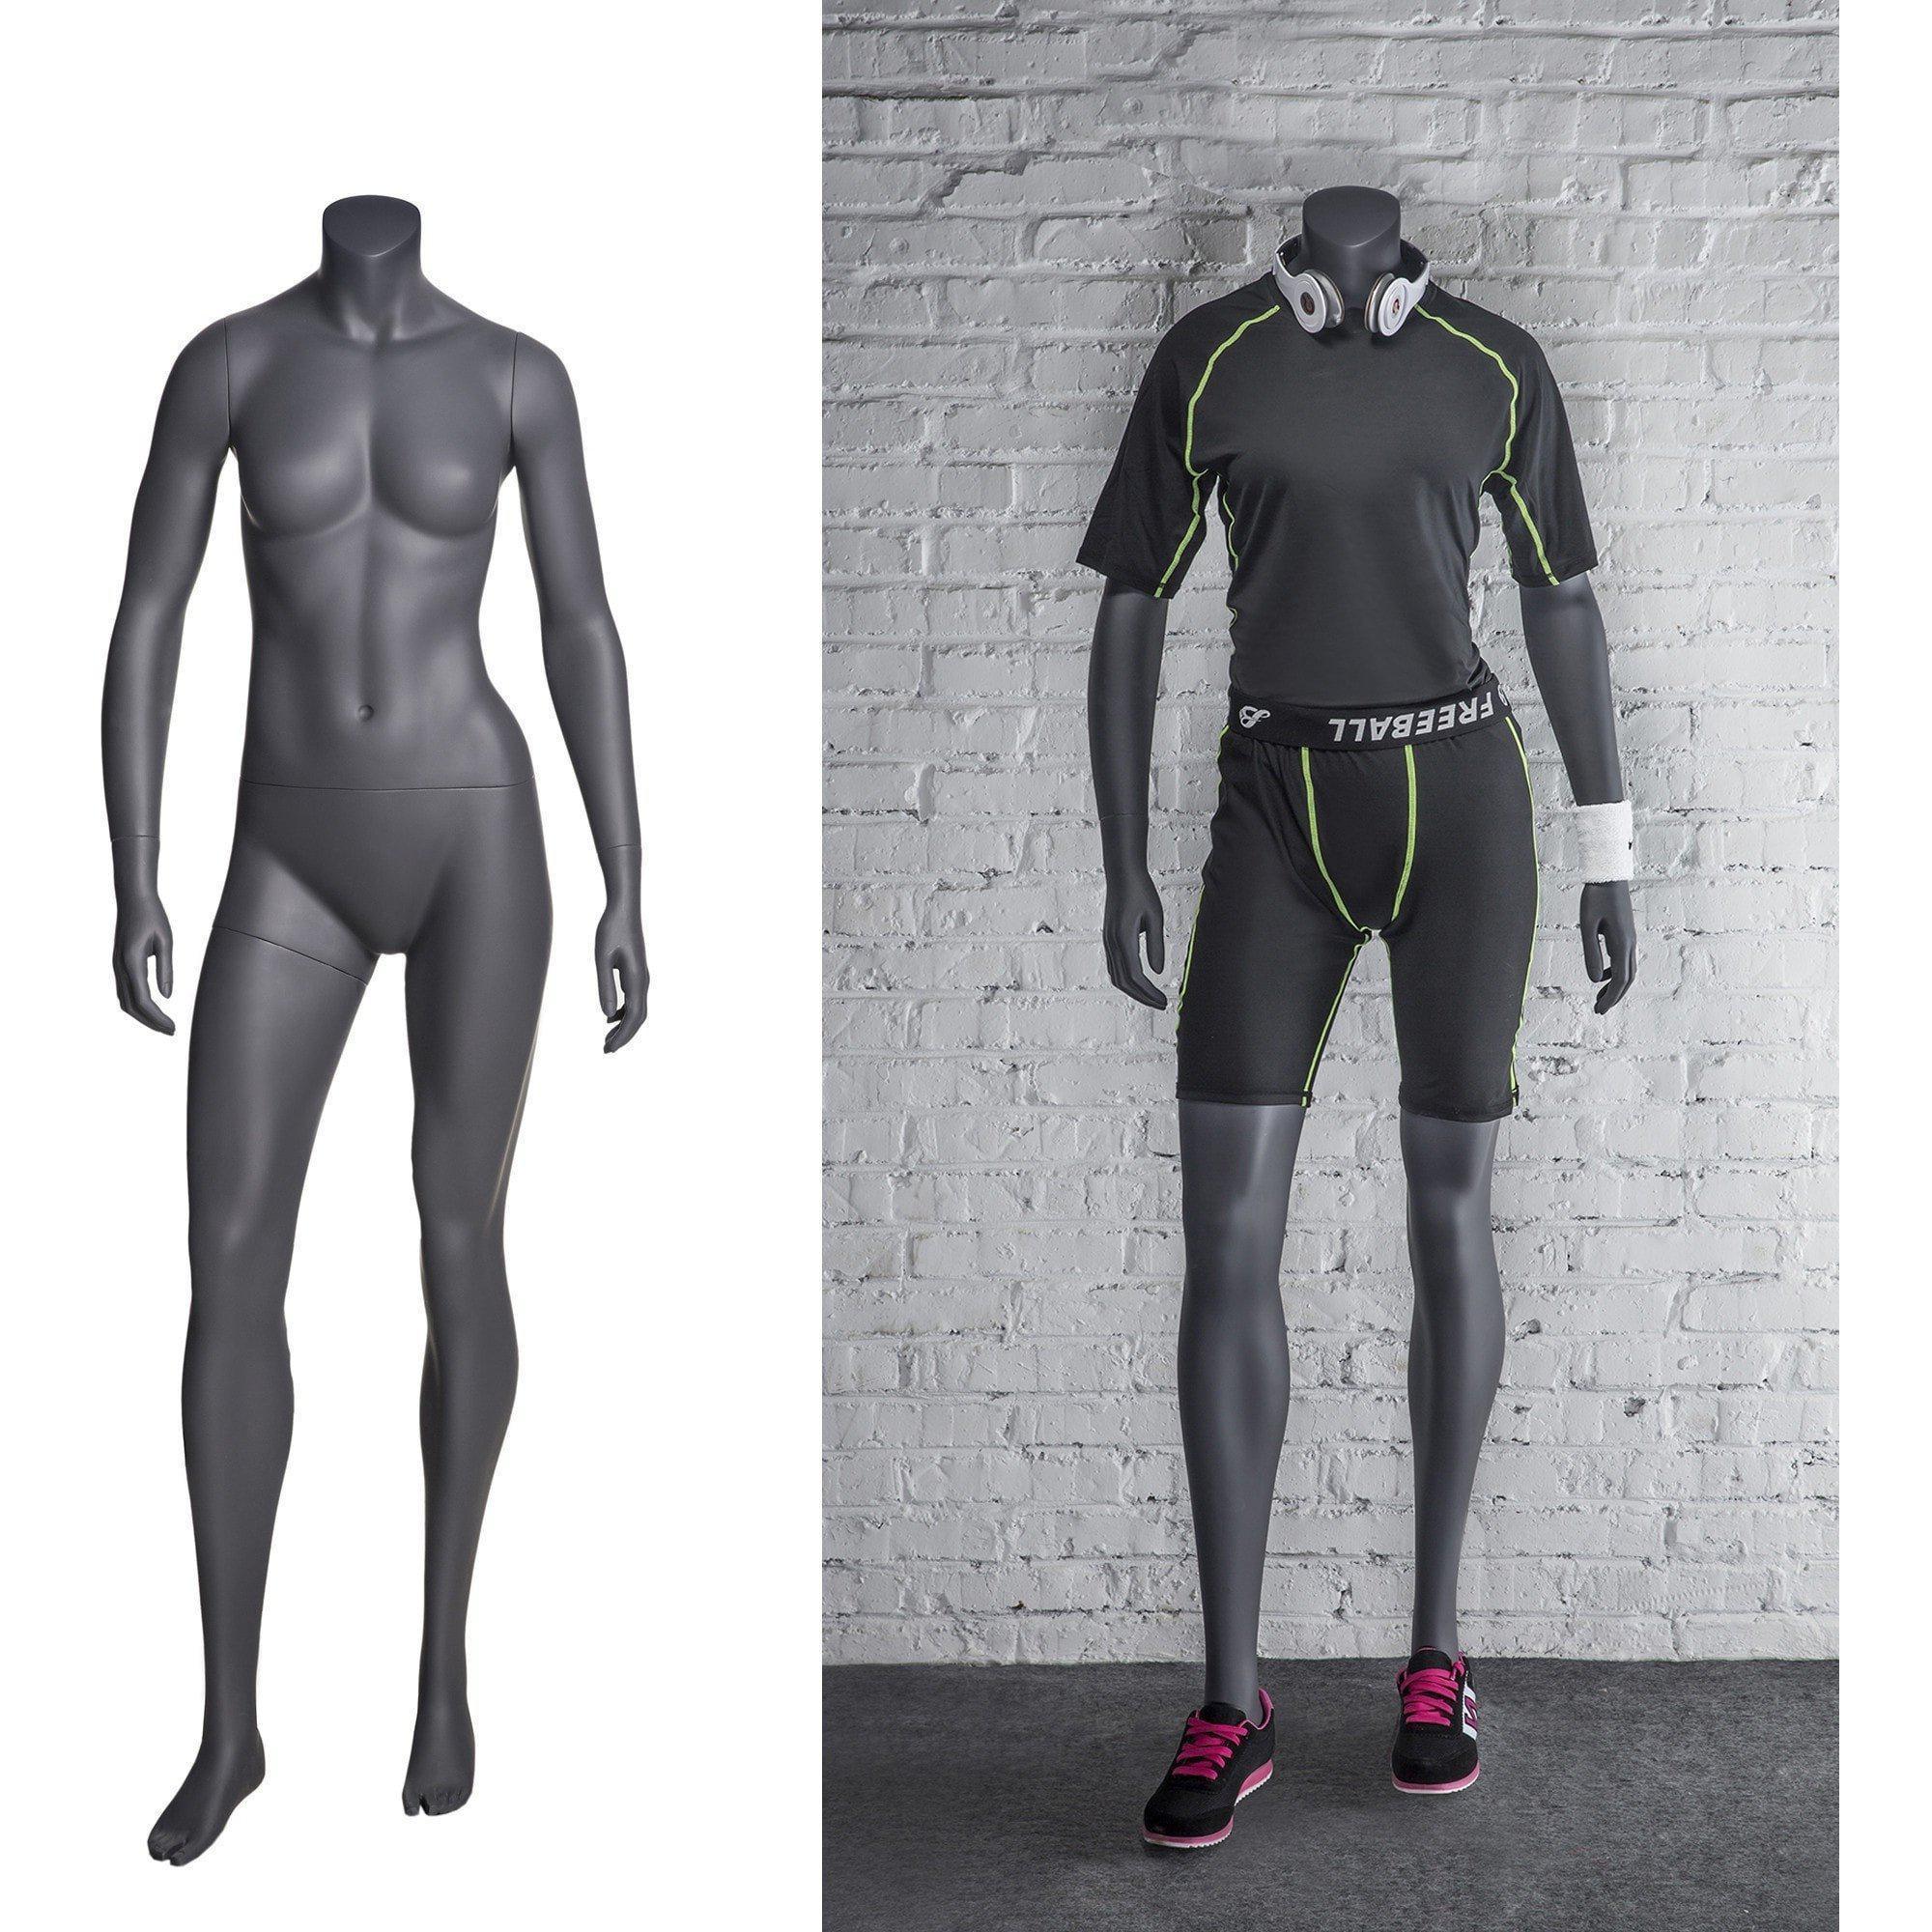 Athletic Sports Headless Female Mannequin MM-NI10 - Mannequin Mall